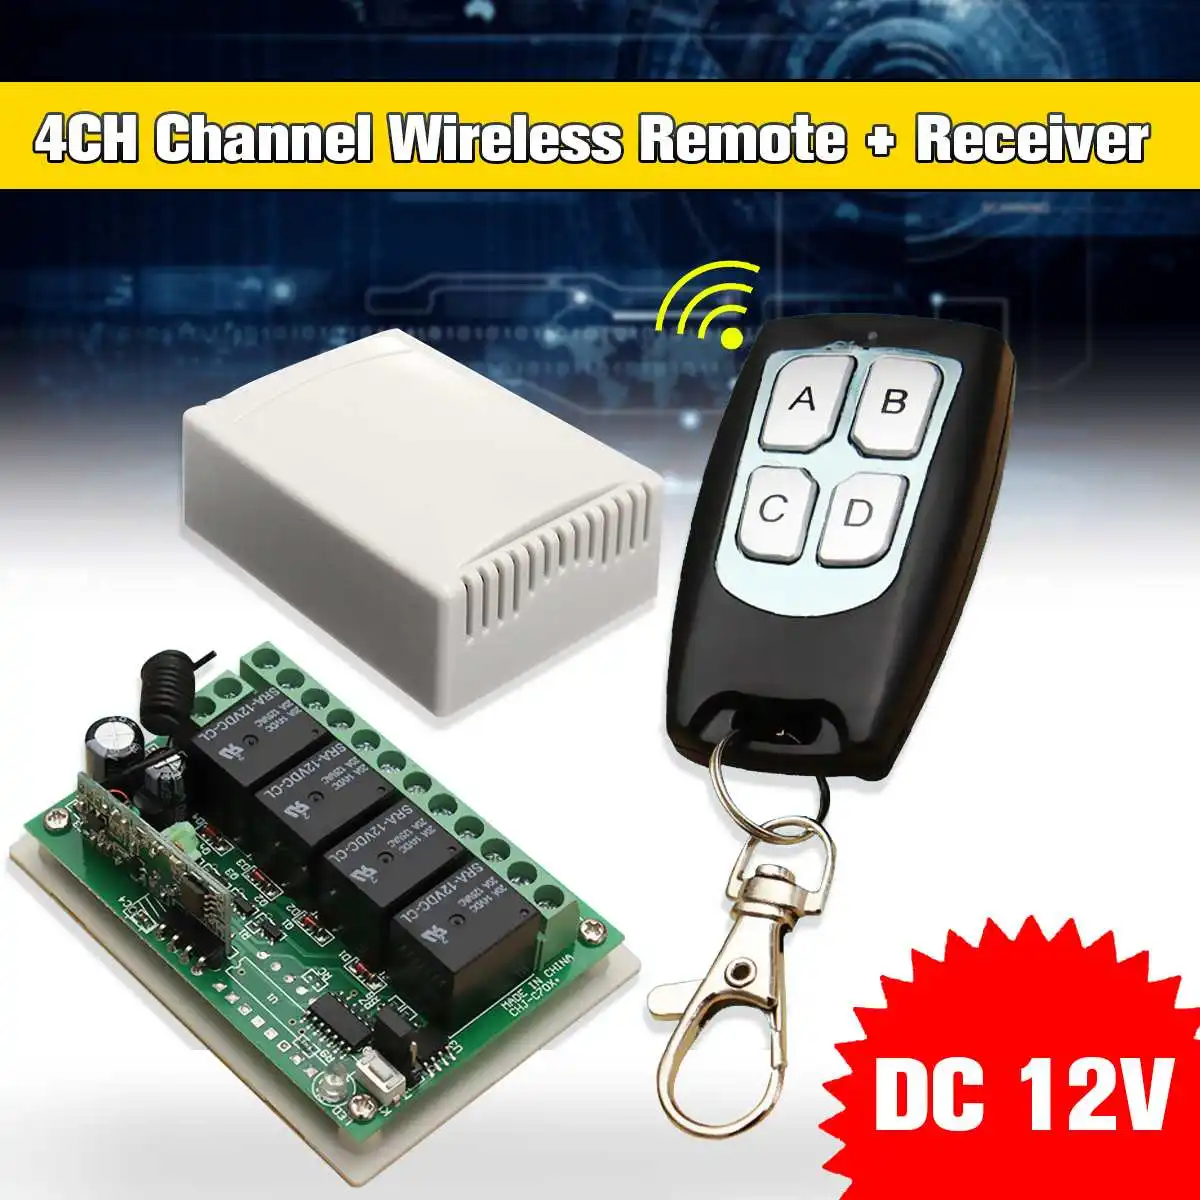 

Small Channel Wireless Remote Control New Arrival for DC 12V 4CH Radio Switch 433mhz Transmitter Receiver 200m High Sensitivity